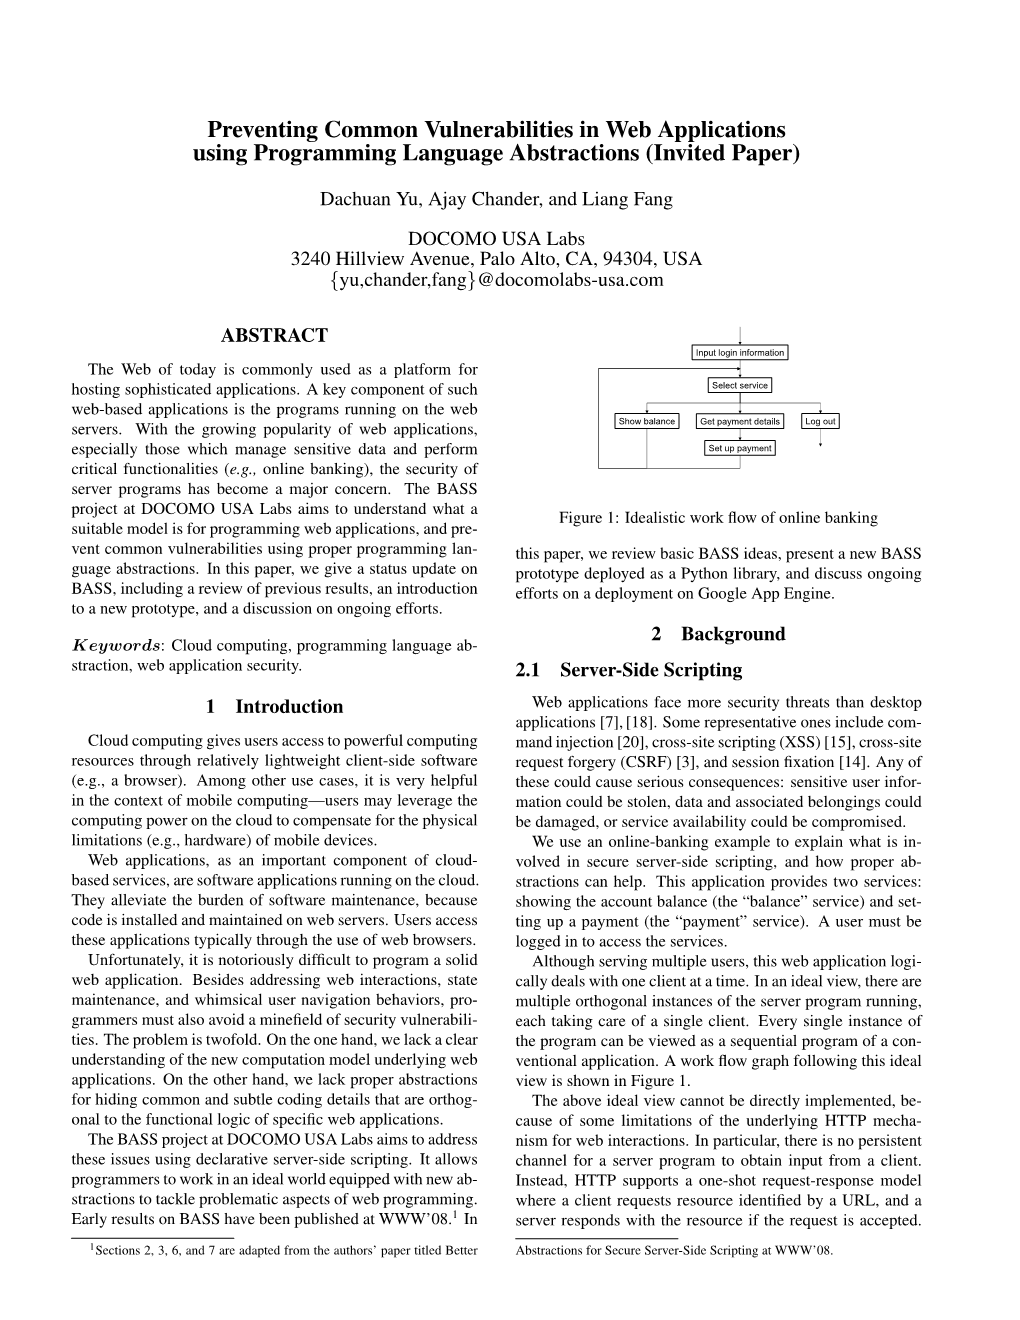 Preventing Common Vulnerabilities in Web Applications Using Programming Language Abstractions (Invited Paper)